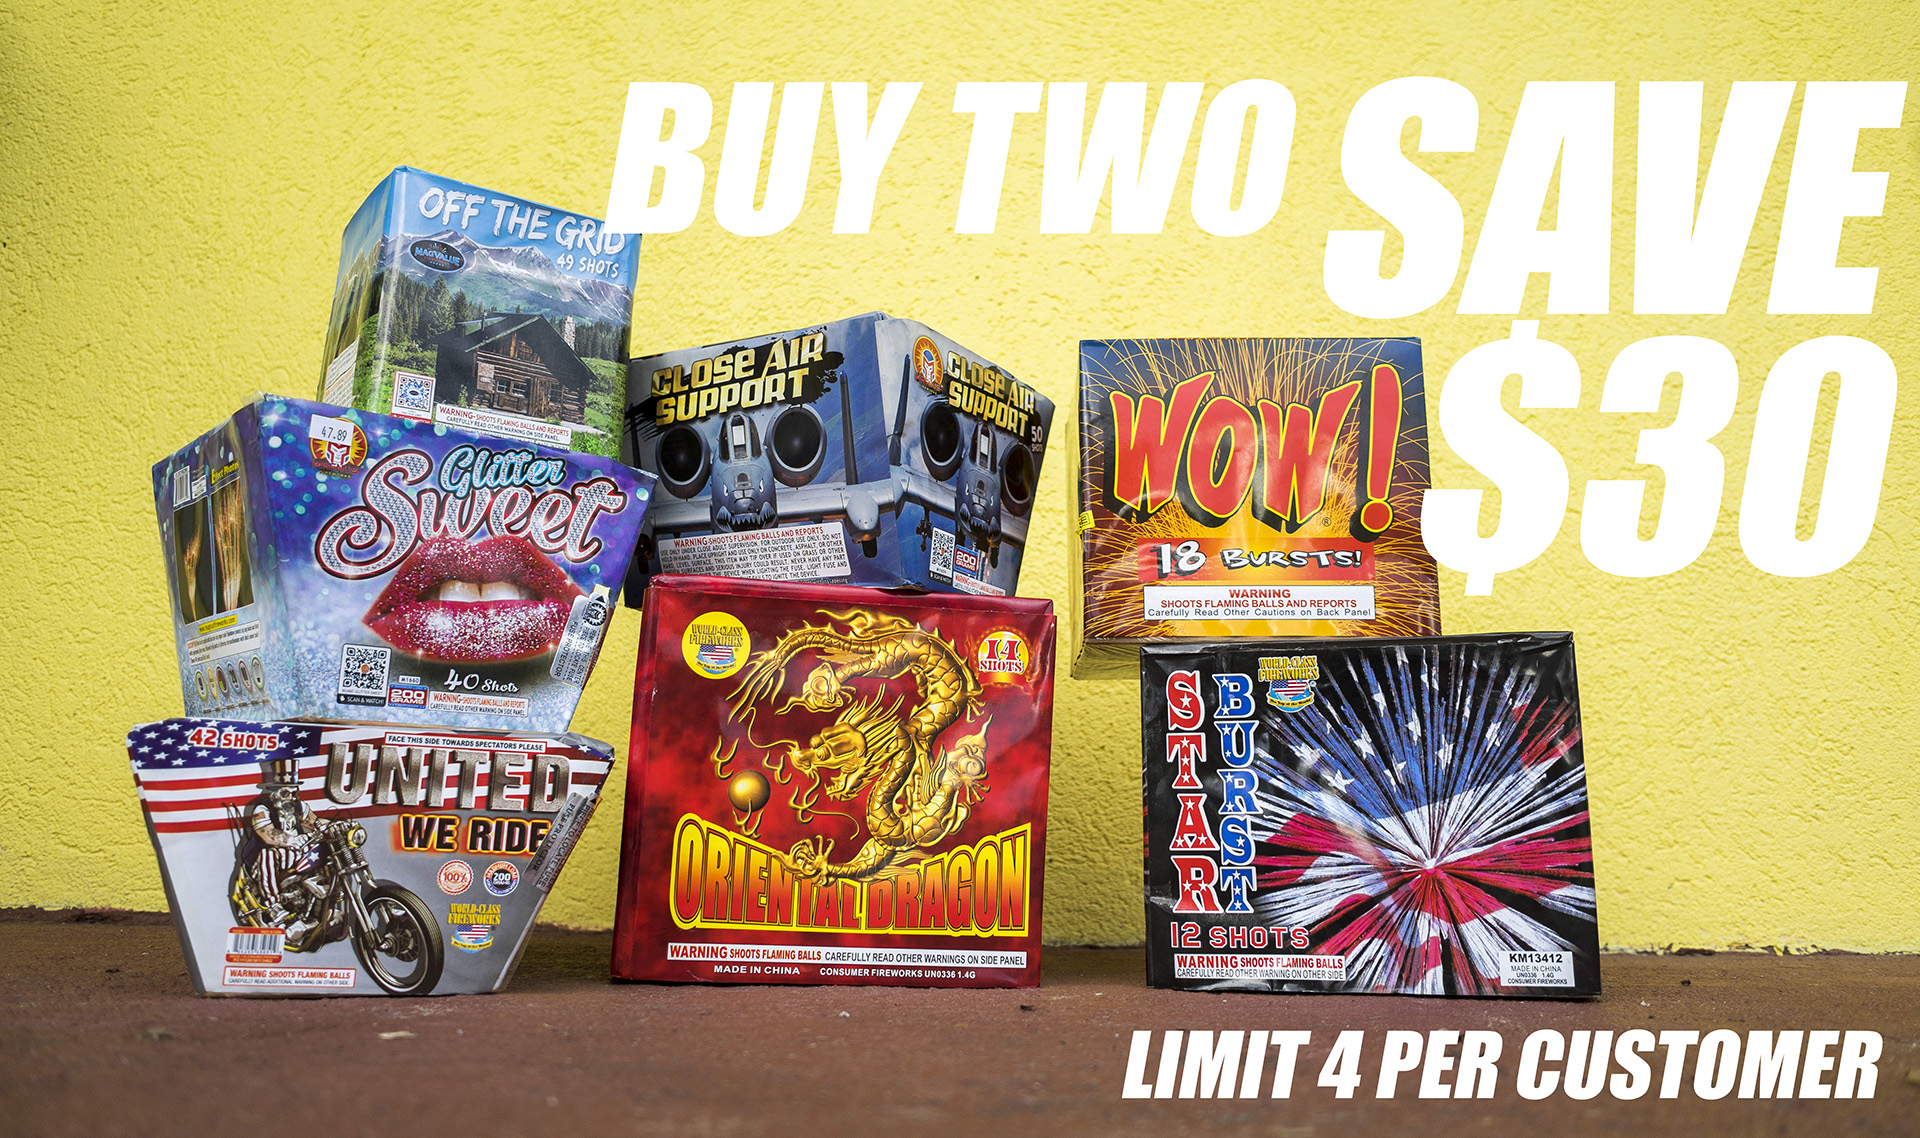 Save $30 on grand finale fireworks from Casey's